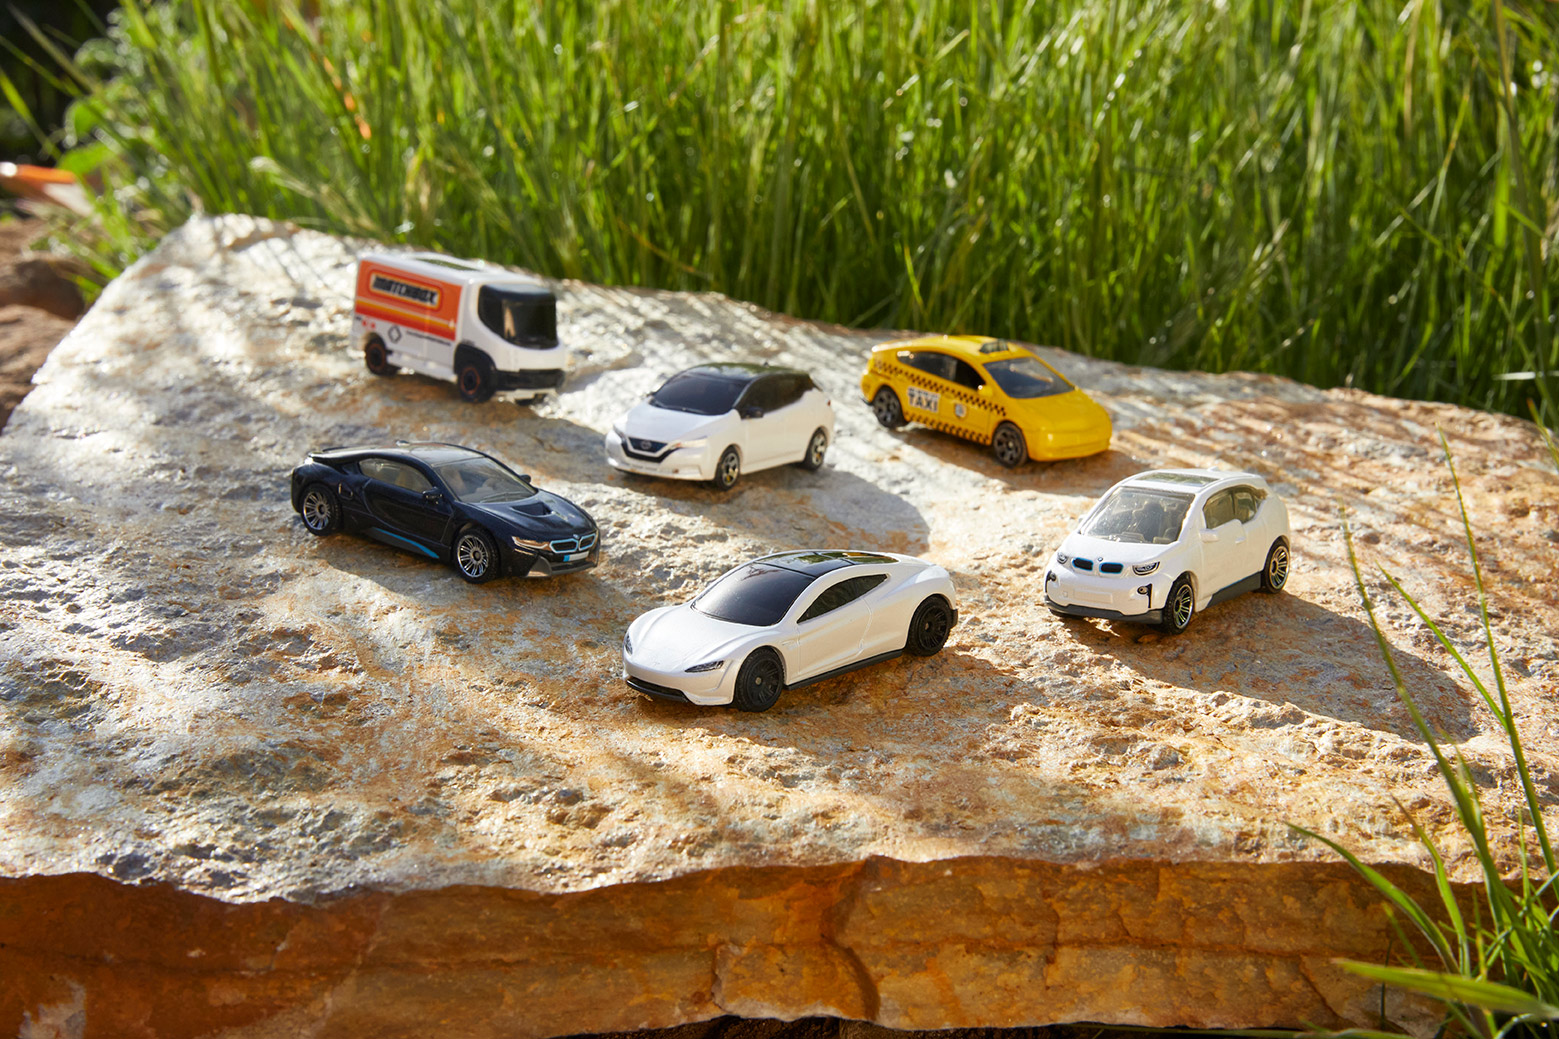 Mattel Announces “Drive Toward A Better Future” Sustainability Initiative With New 2020 Tesla Roadster